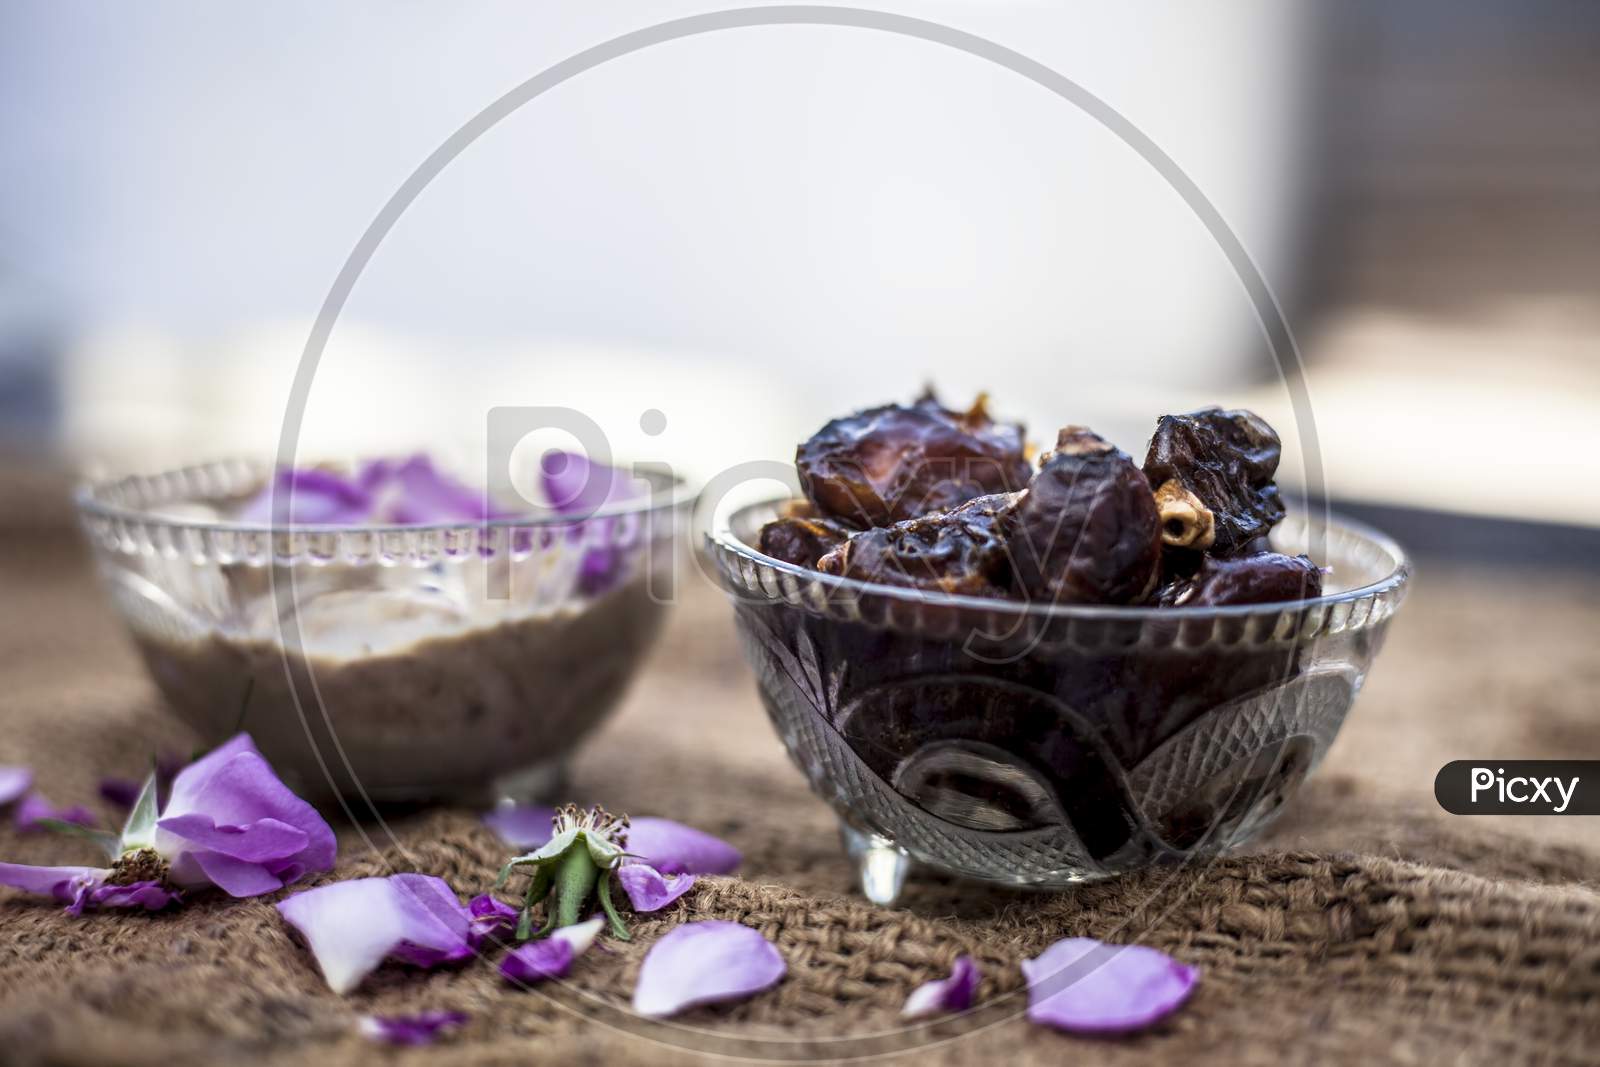 Close Up Shot Of Popular Indian & Asian Winter Dessert In A Transparent Glass Bowl I.E. Khajor Ka Halwa Or Dates Confection With Raw Dates And Some Rose Petals On Brown Colored Surface.